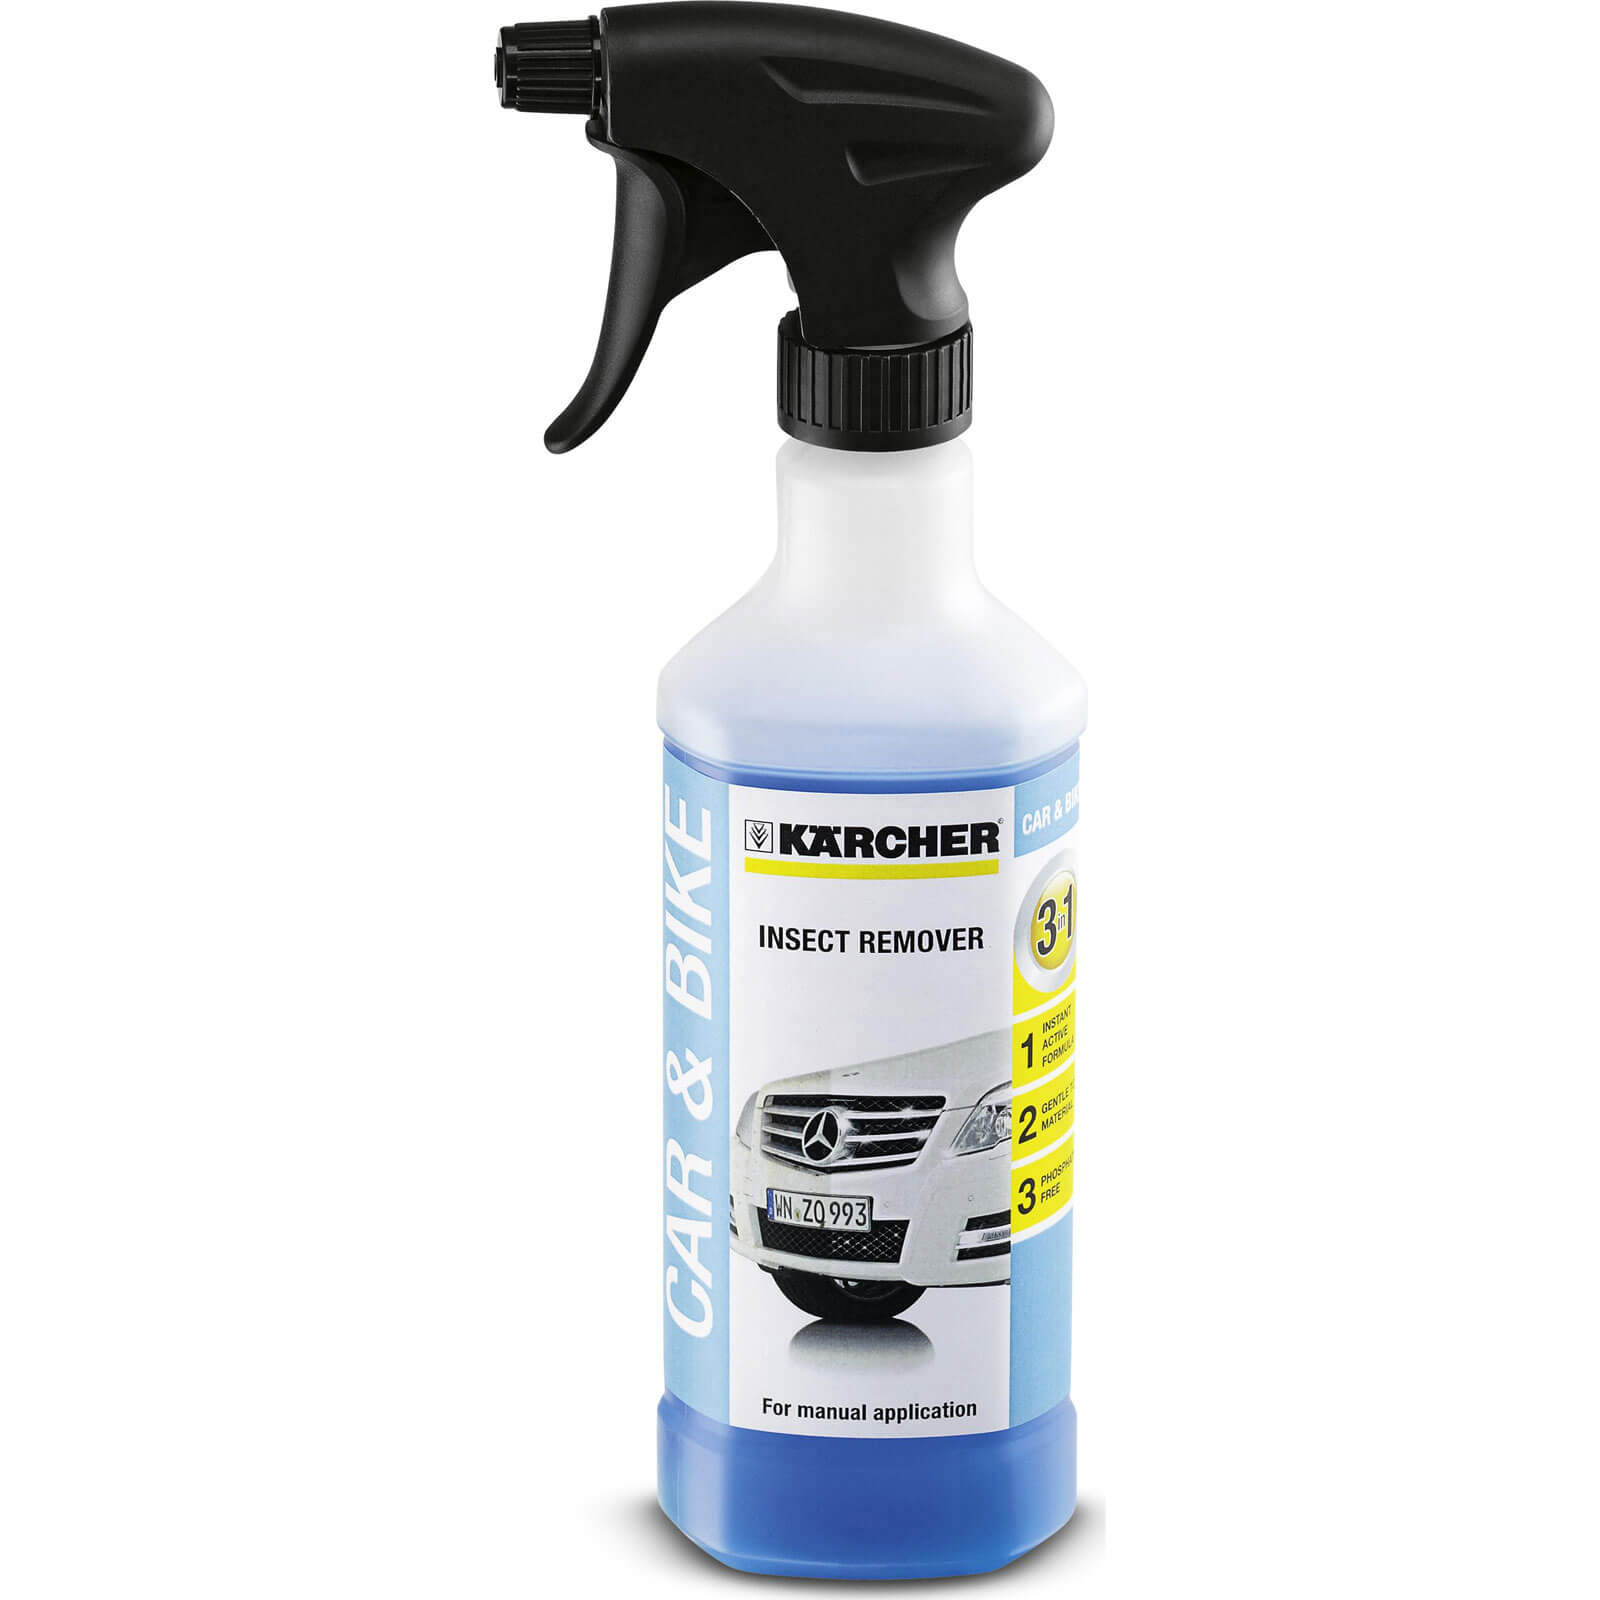 Karcher Insect Remover for Pressure Washers